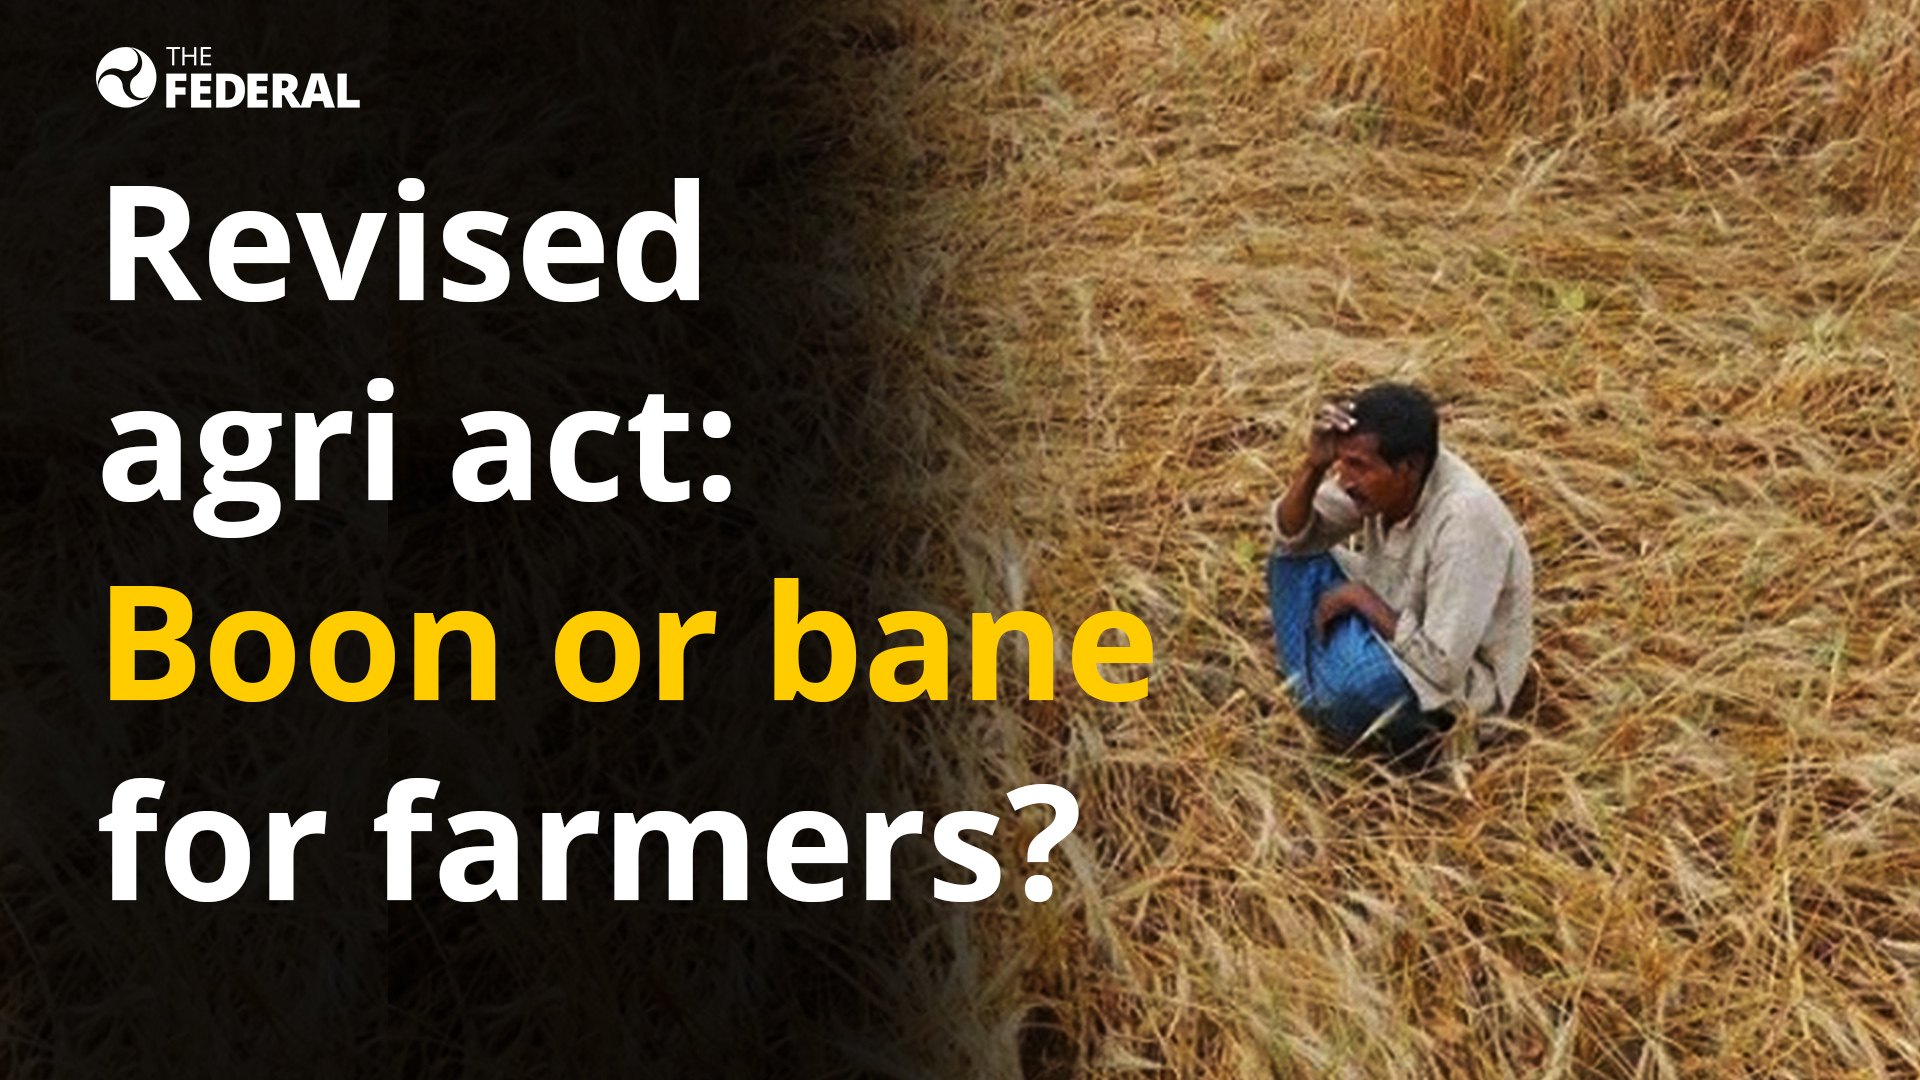 Revised agriculture act: Boon or bane for farmers?